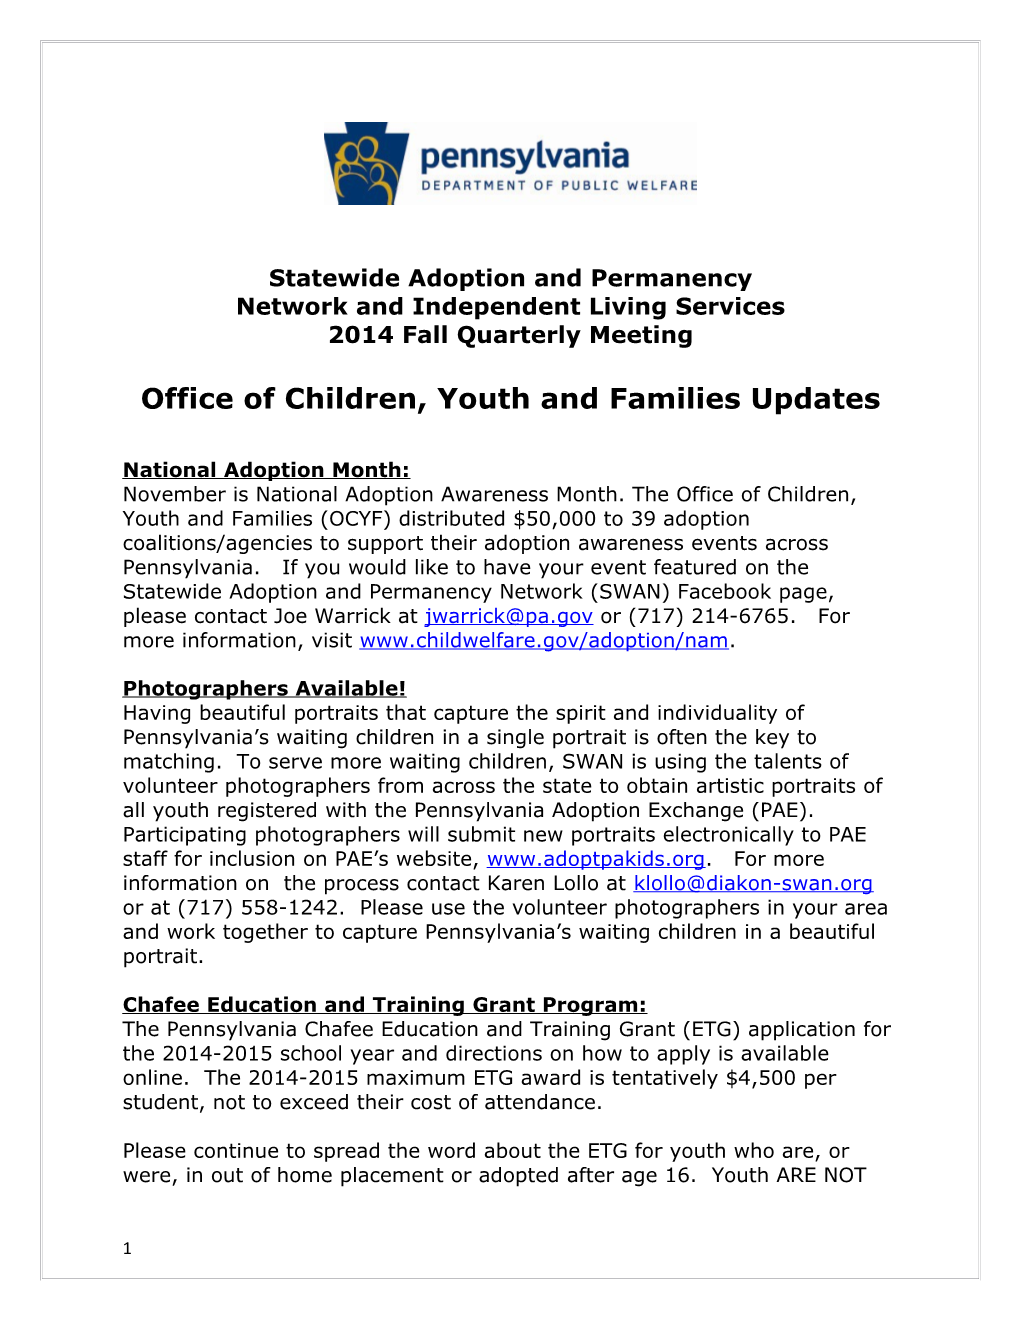 Statewide Adoption and Permanency